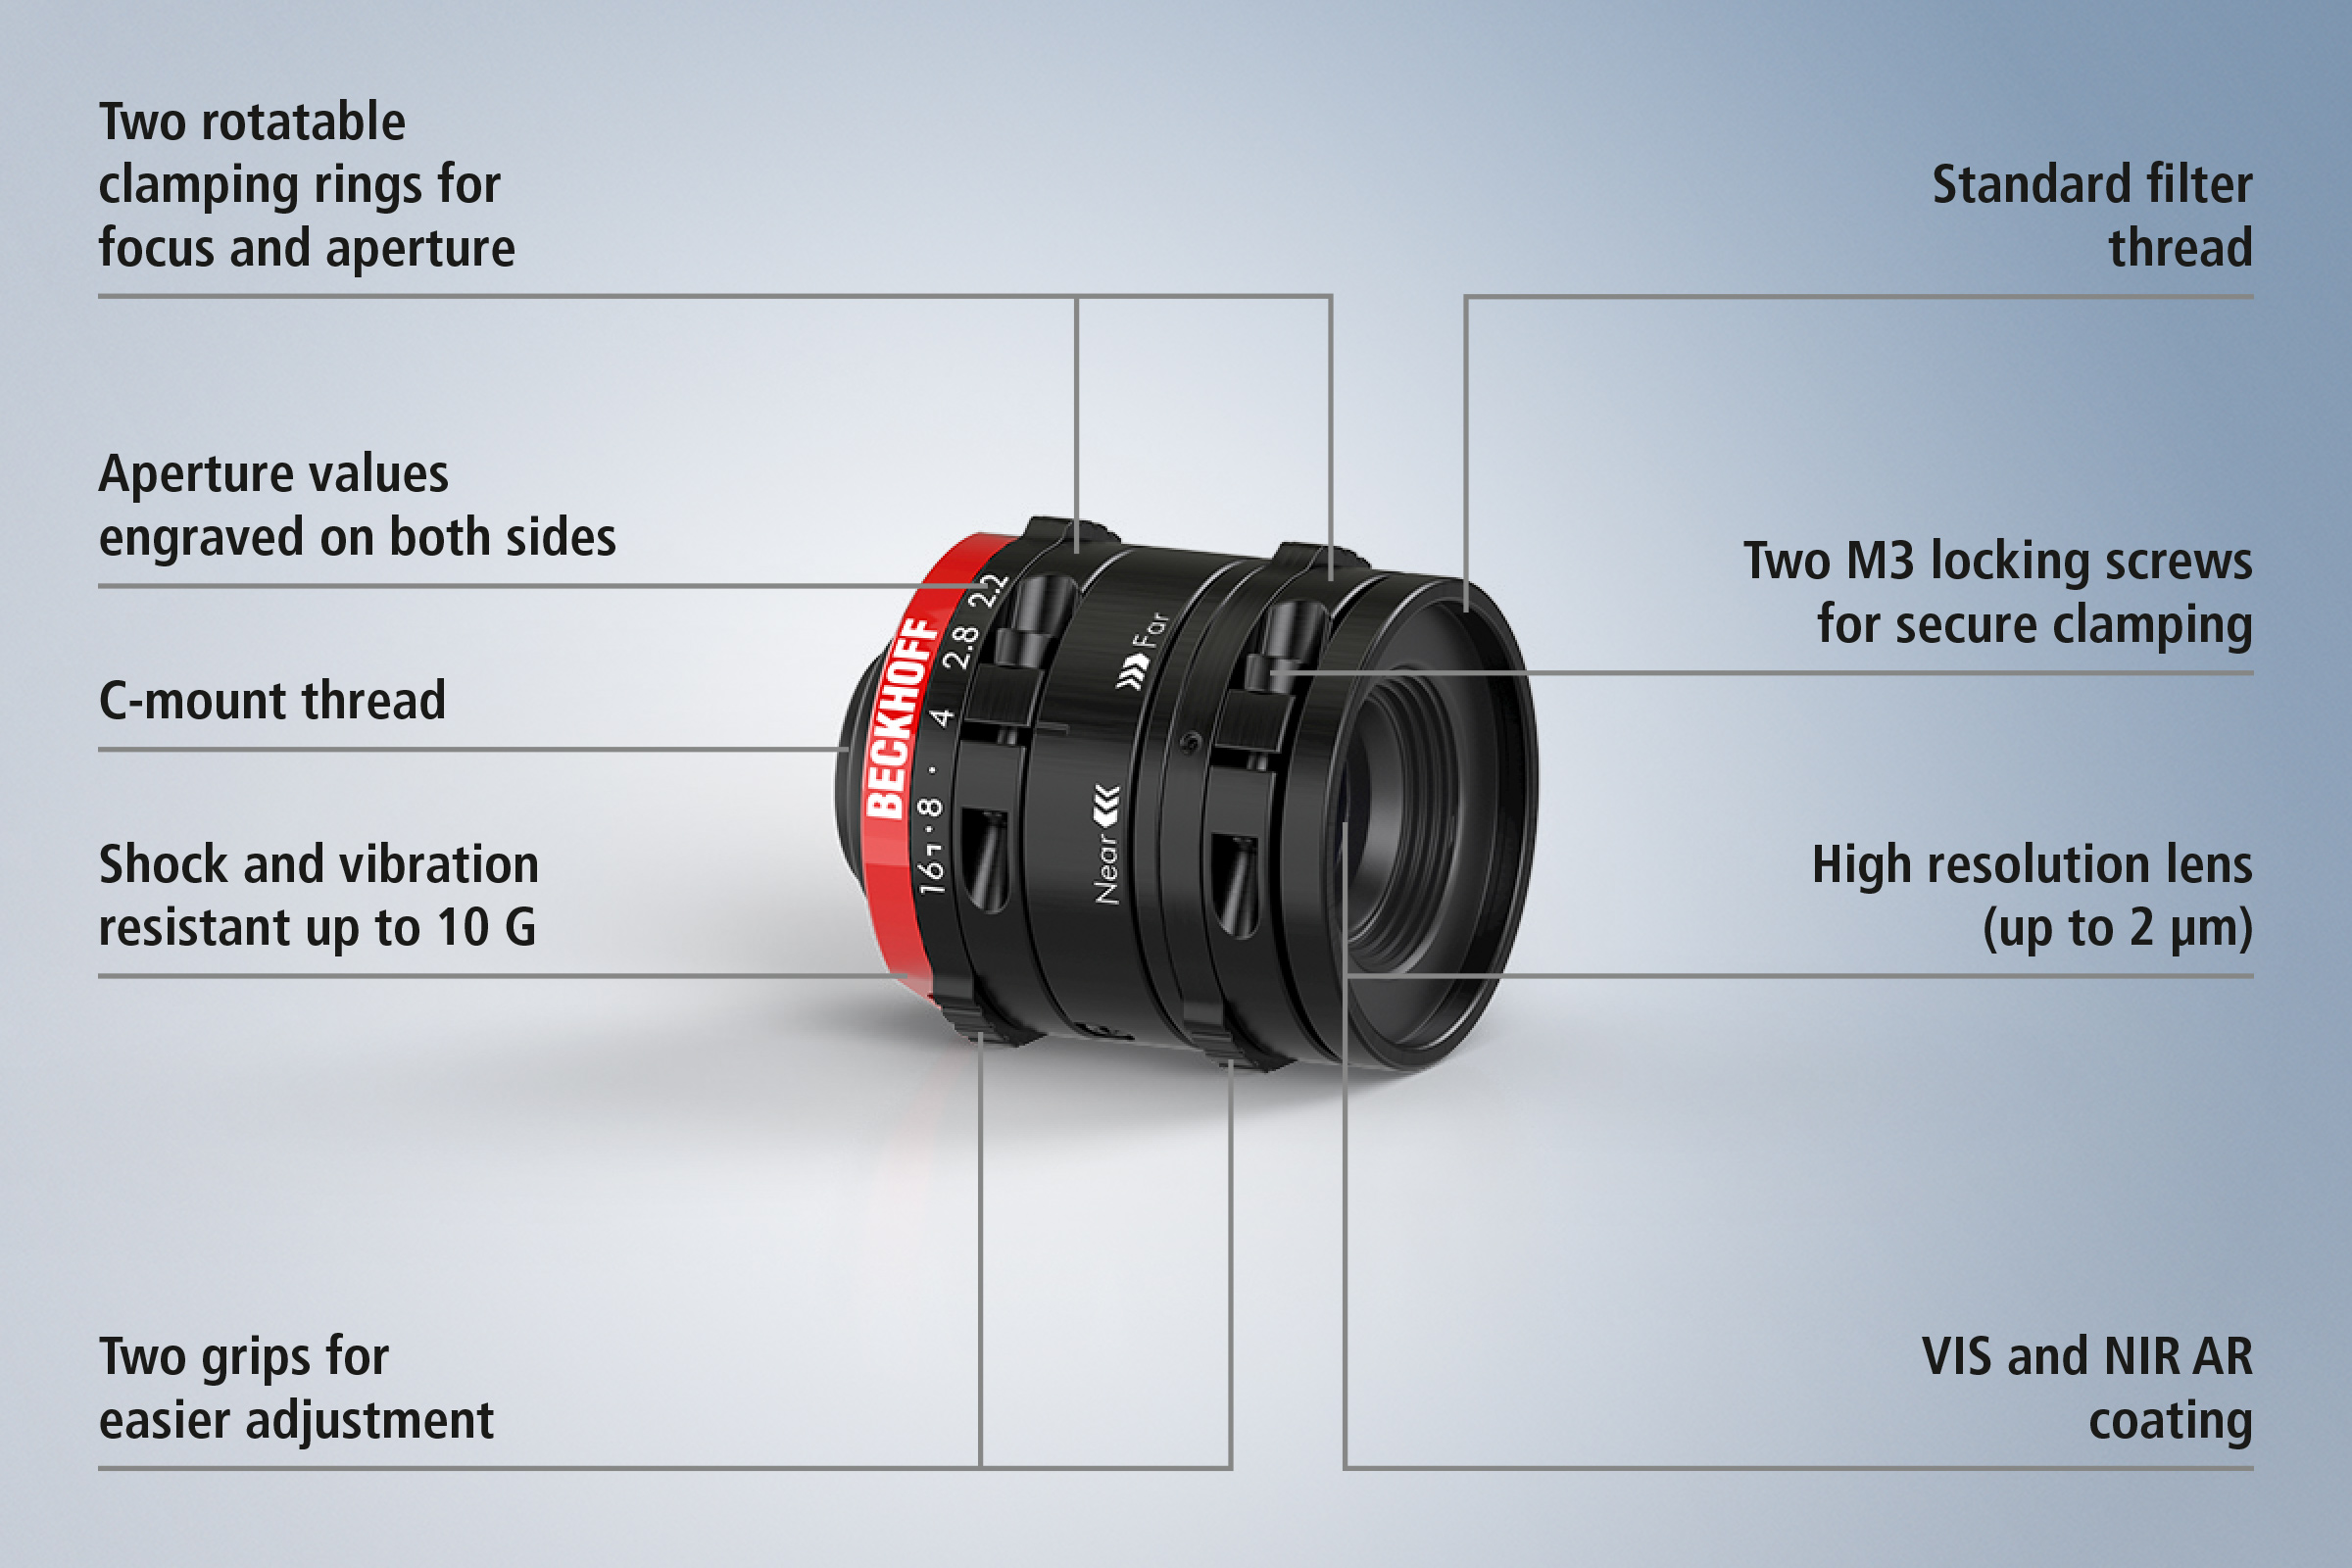 VOS2000, VOS3000: Robust lenses for industrial applications withstand vibration and shock without changing focus or aperture. 